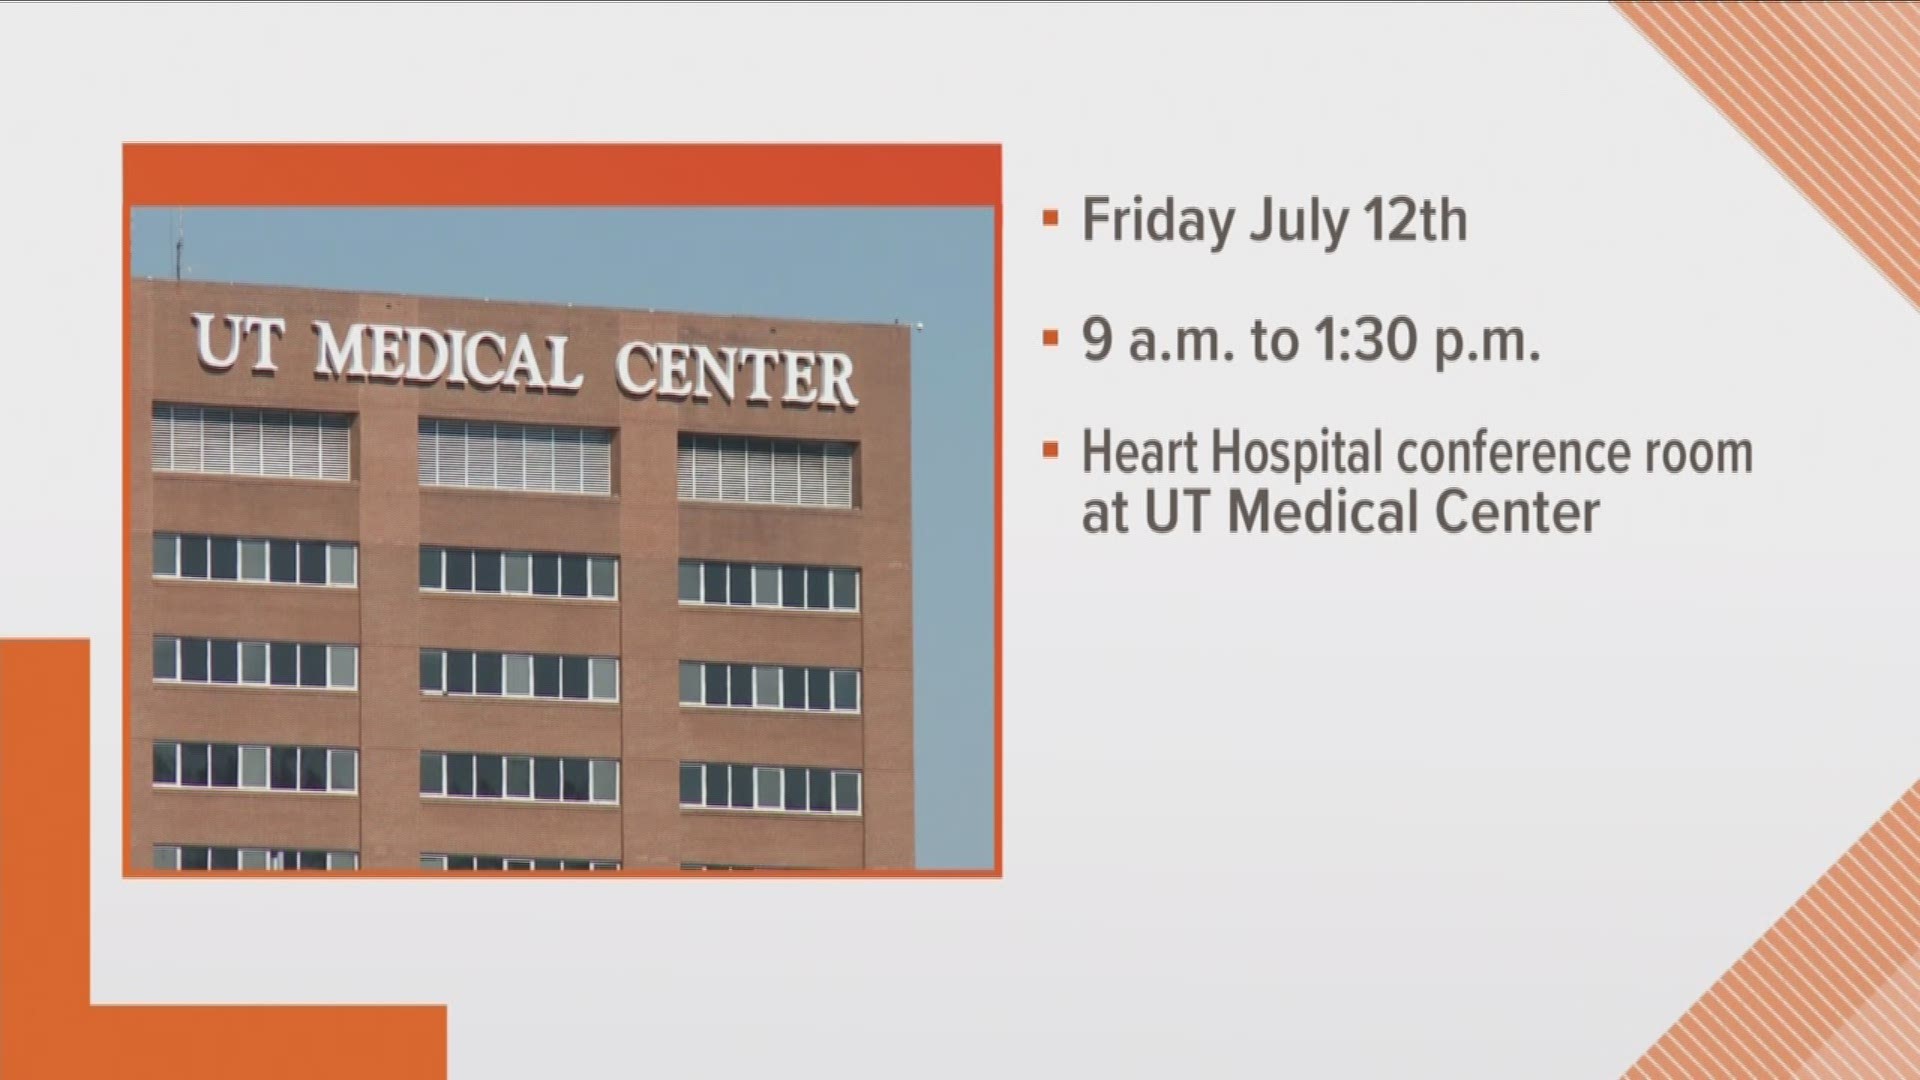 Dr. Christopher Tolleson with UT Medical Center is here to talk about Huntington's Disease and an Education Day that will be held at UT Medical Center.